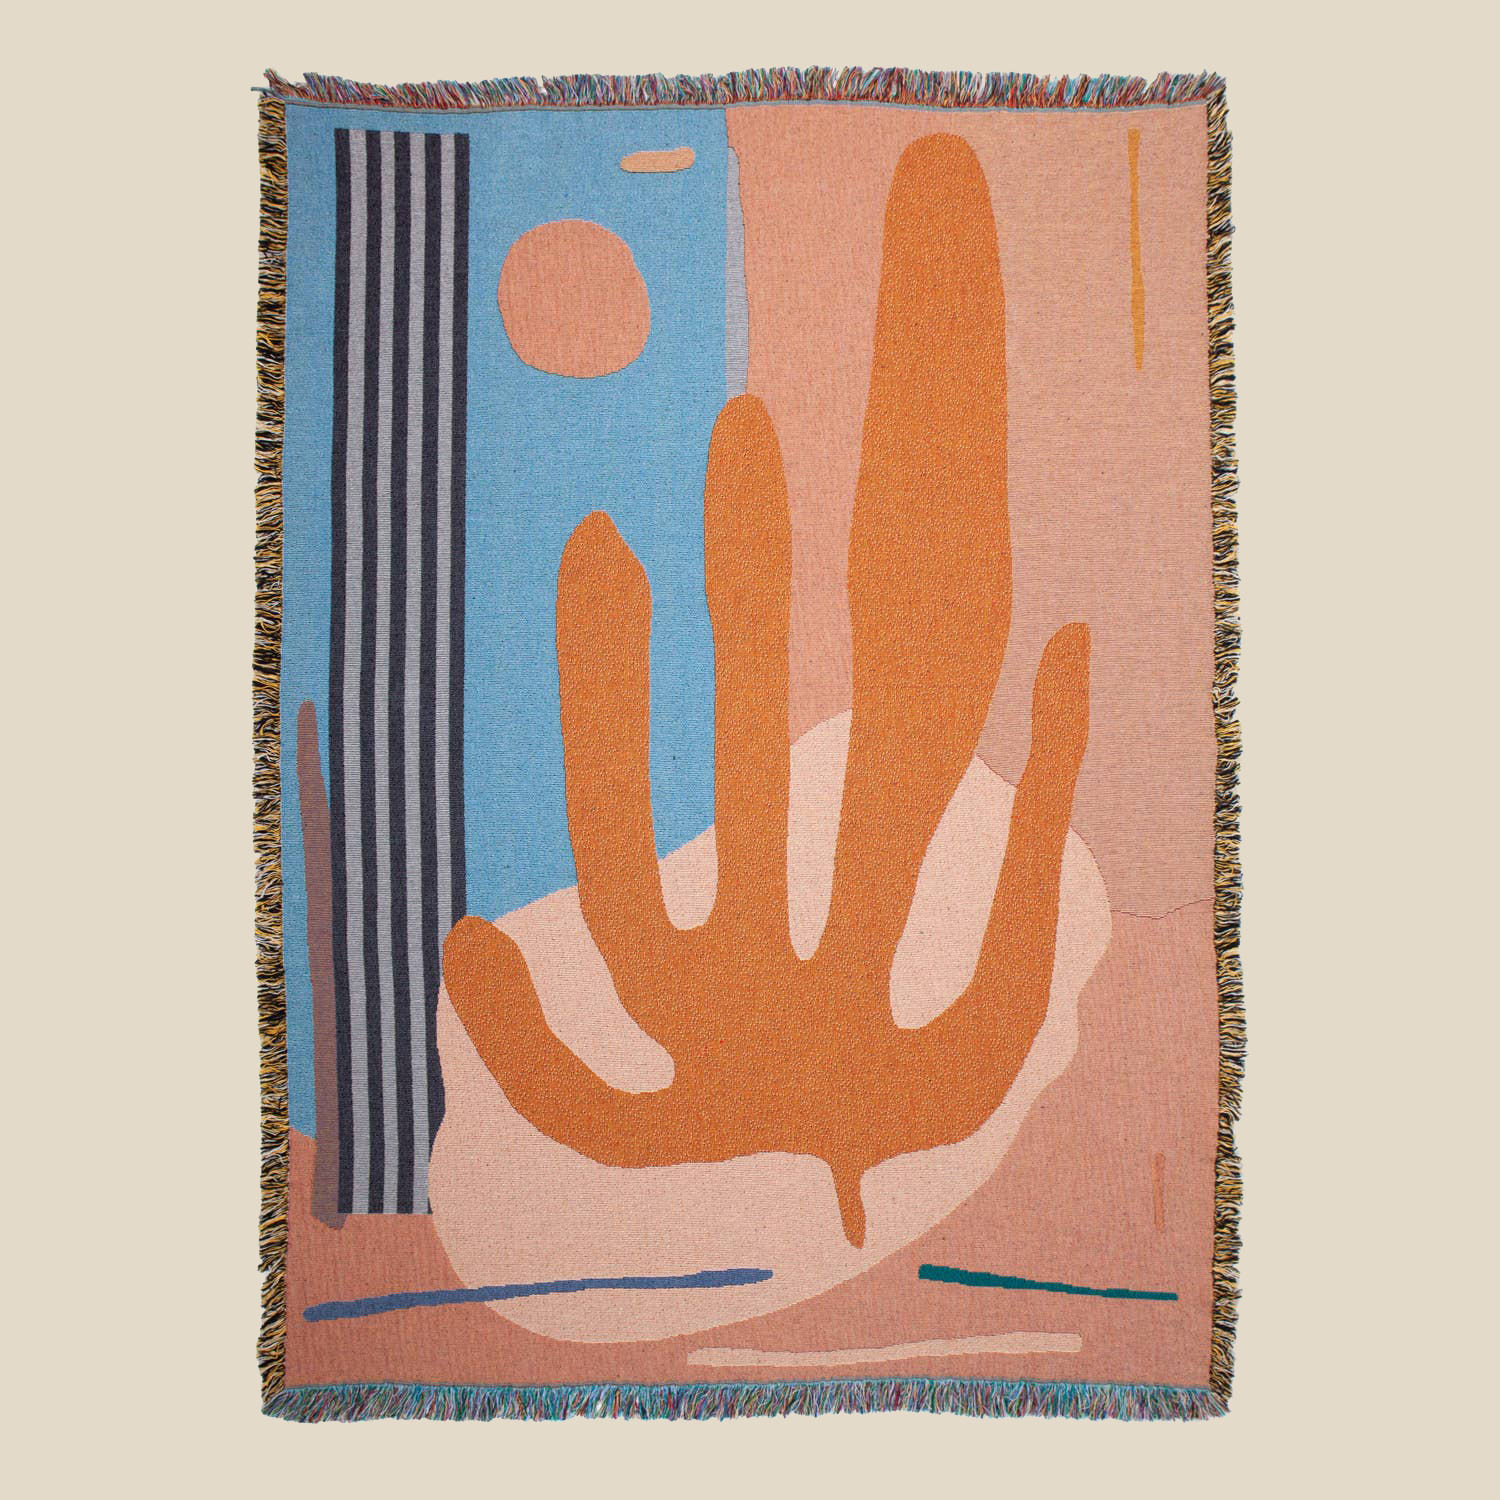 "Hazelwood" Jacquard Throw depicts an abstract orange cactus on a summer desert sunset scene with earthy pink and blue hues